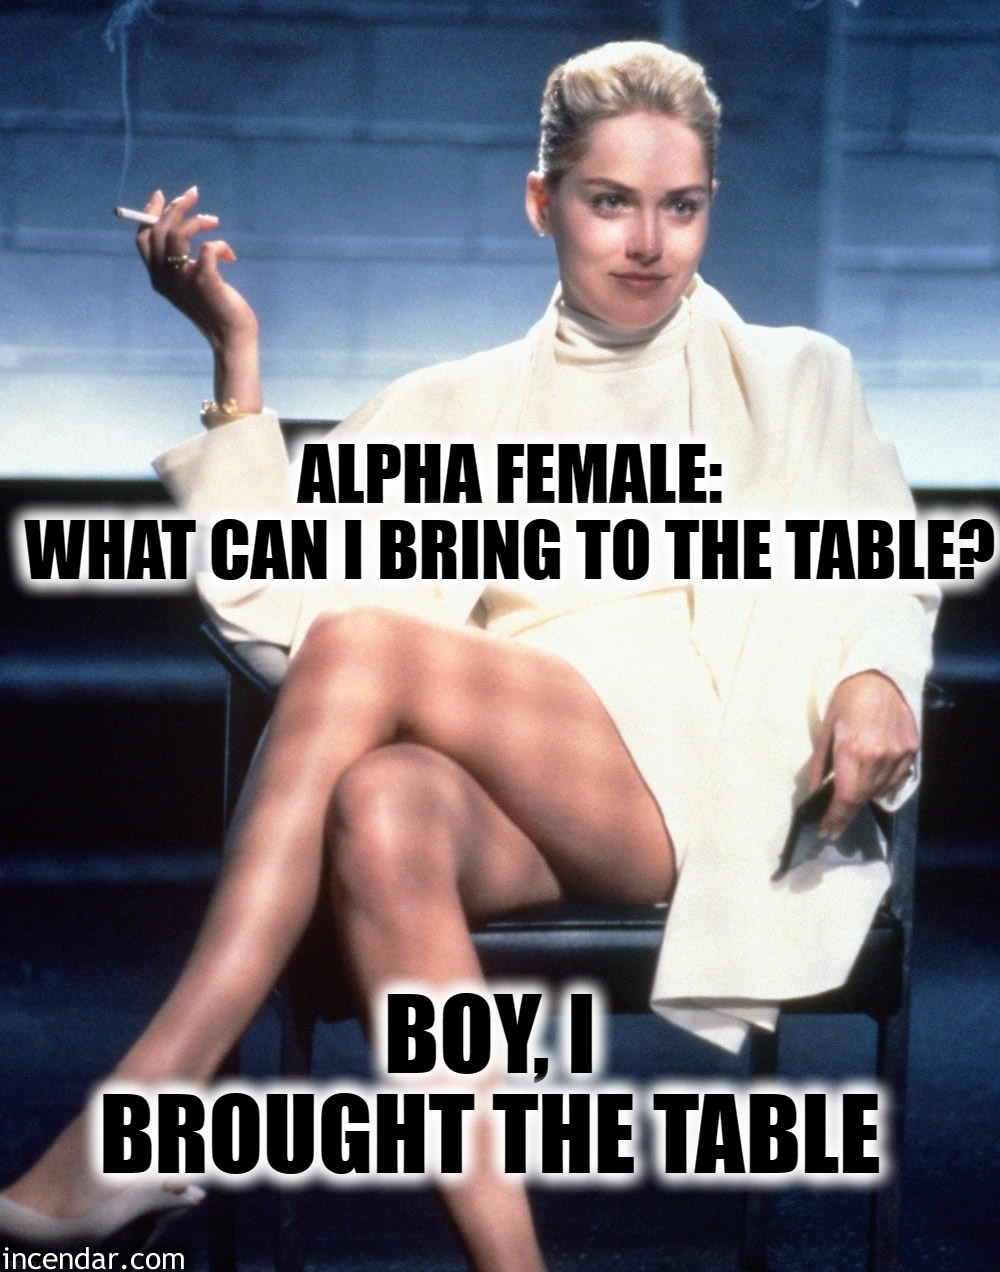 Enjoy a humorous Alpha Female meme that celebrates empowered women and their strength. Share this meme to inspire and uplift your friends.